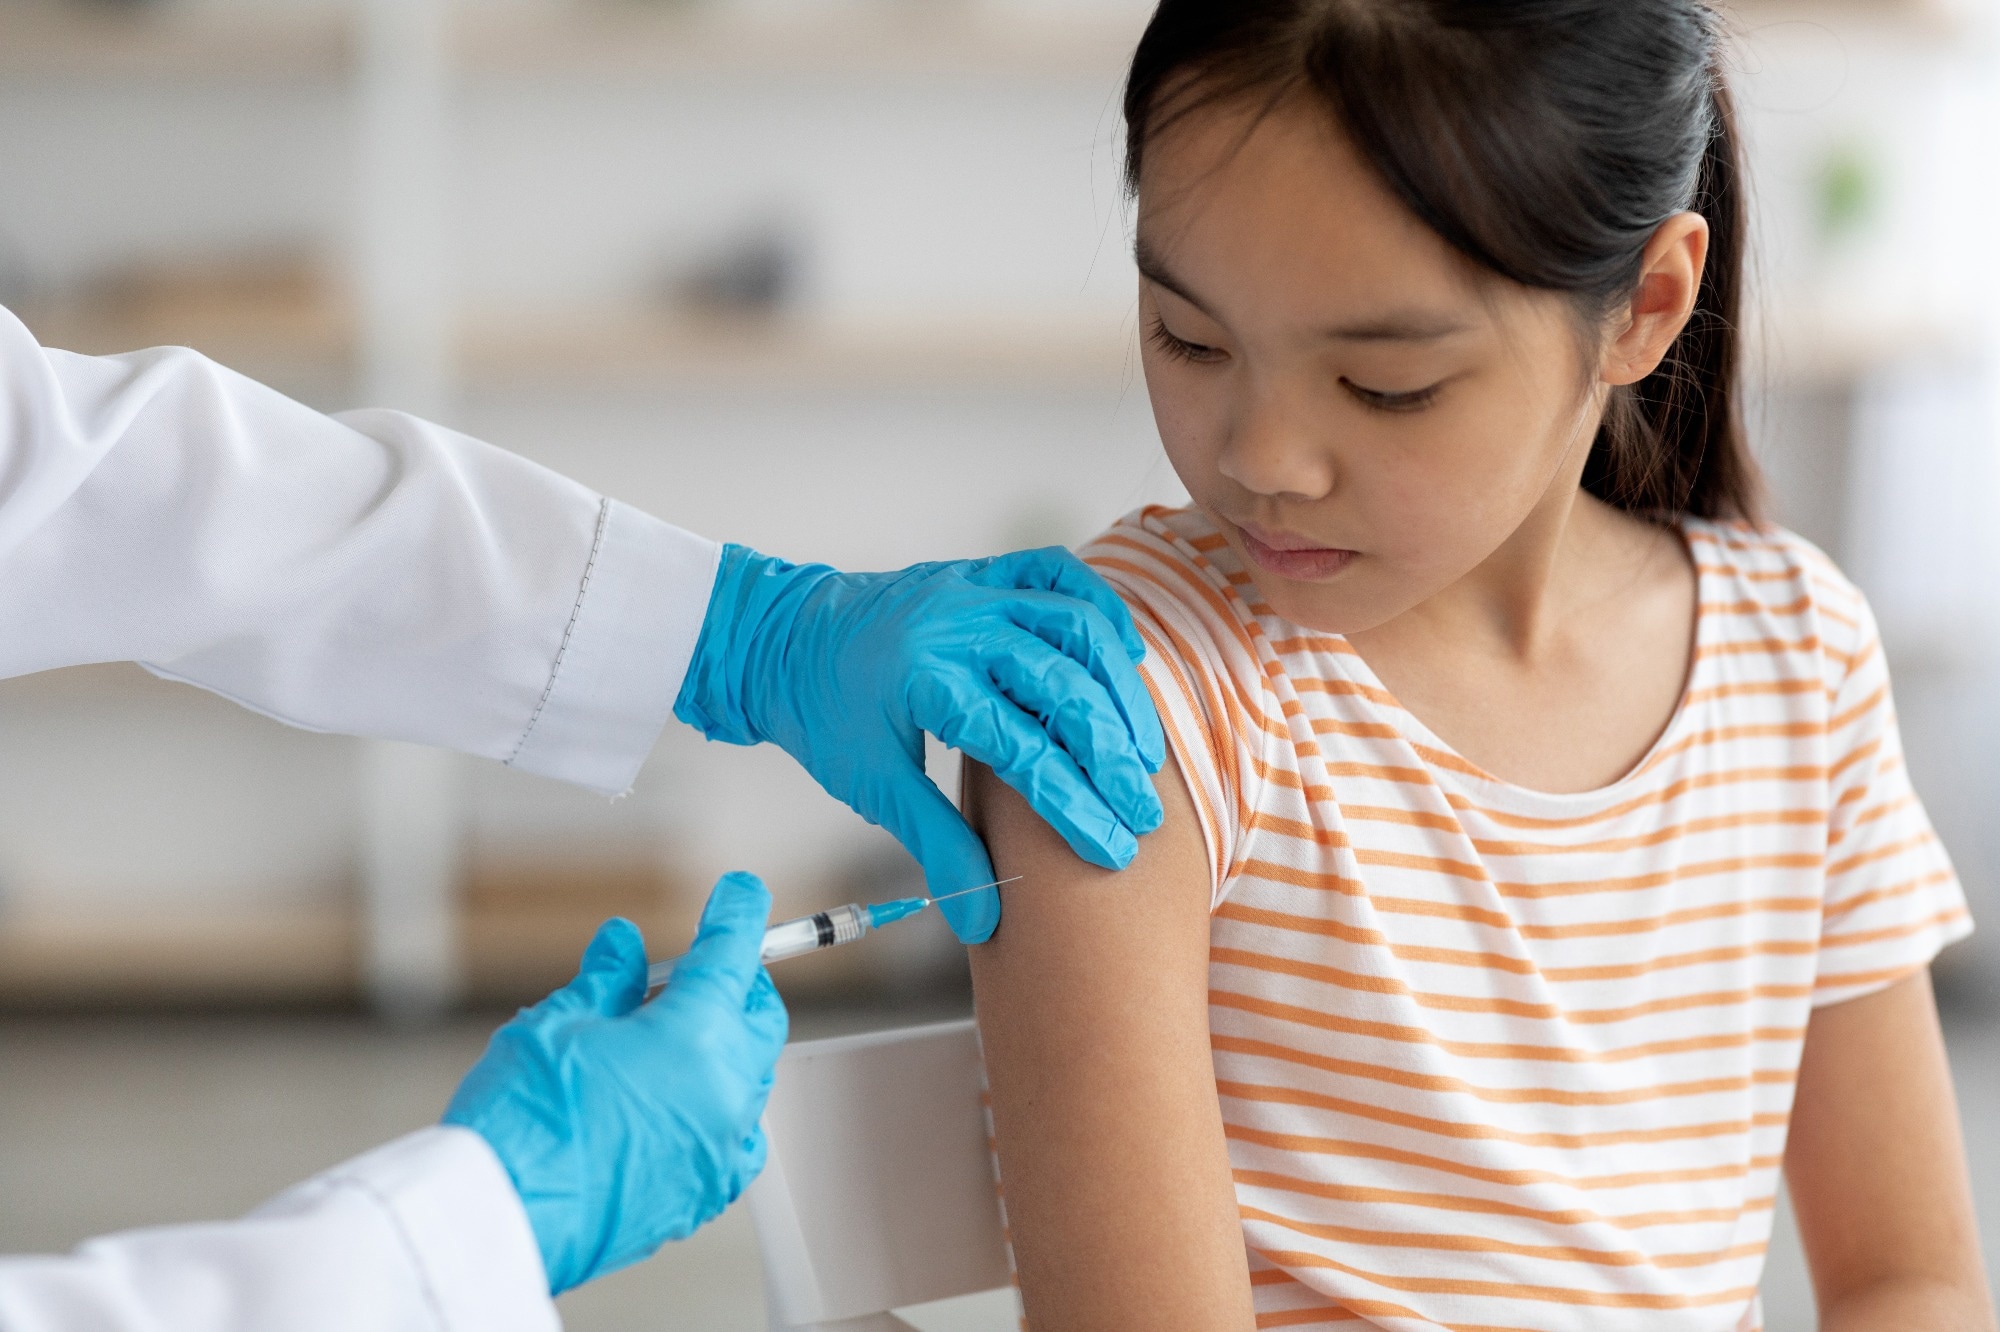 Did California’s pediatric COVID-19 vaccination program reduce reported cases and hospitalizations?